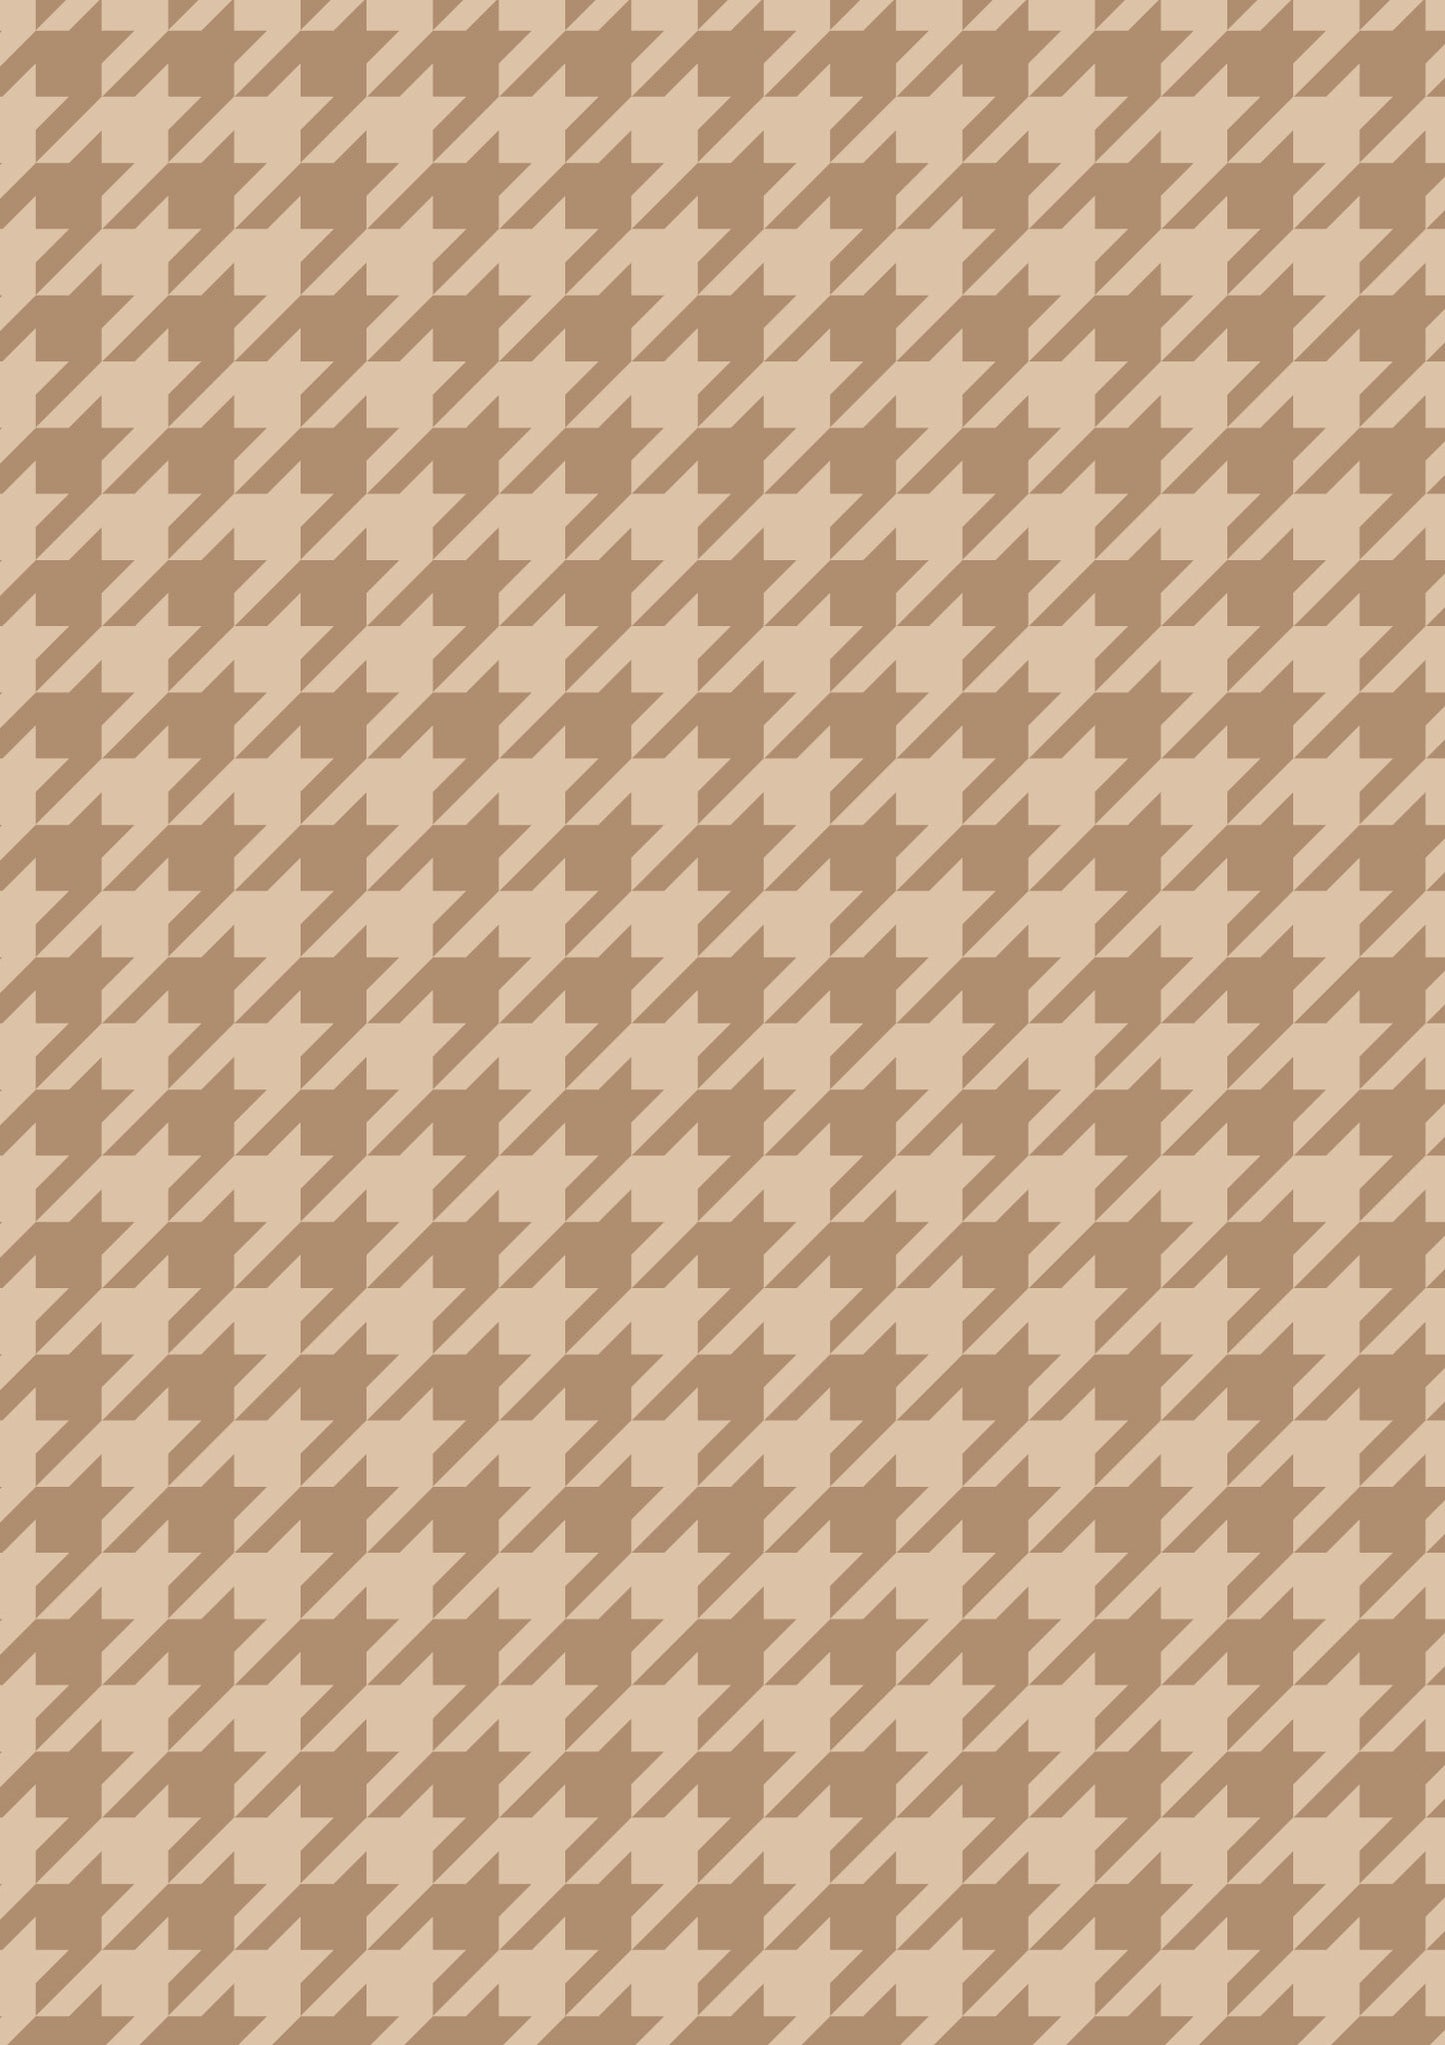 Beige A1 Photography Backdrop - Houndstooth